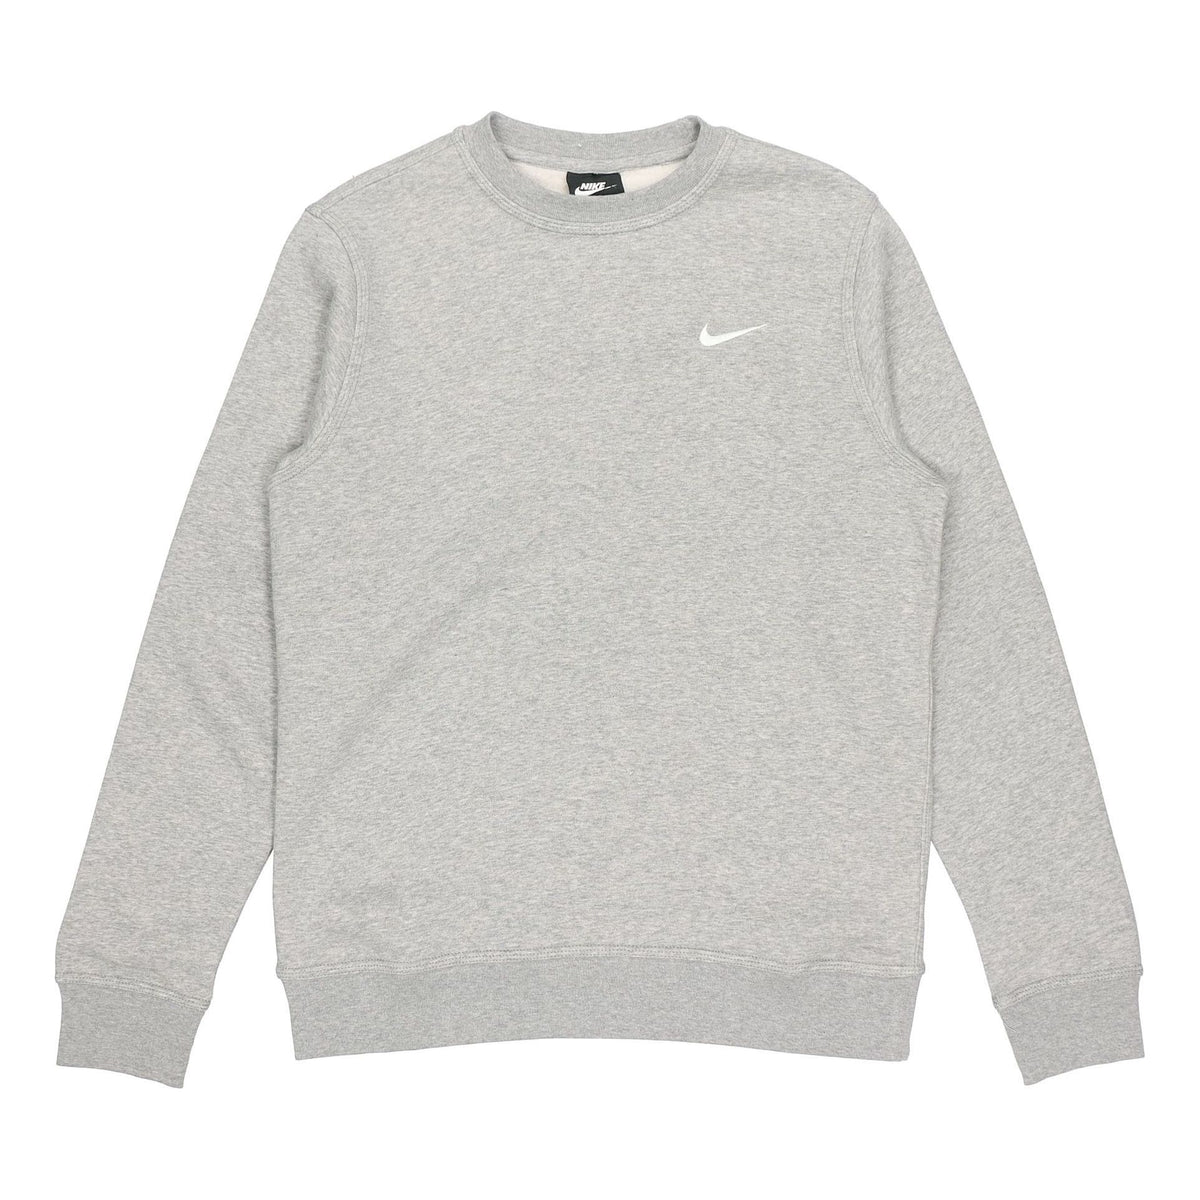 Men's Nike Fleece Lined Embroidered Small Logo Classic Sports Gray 916